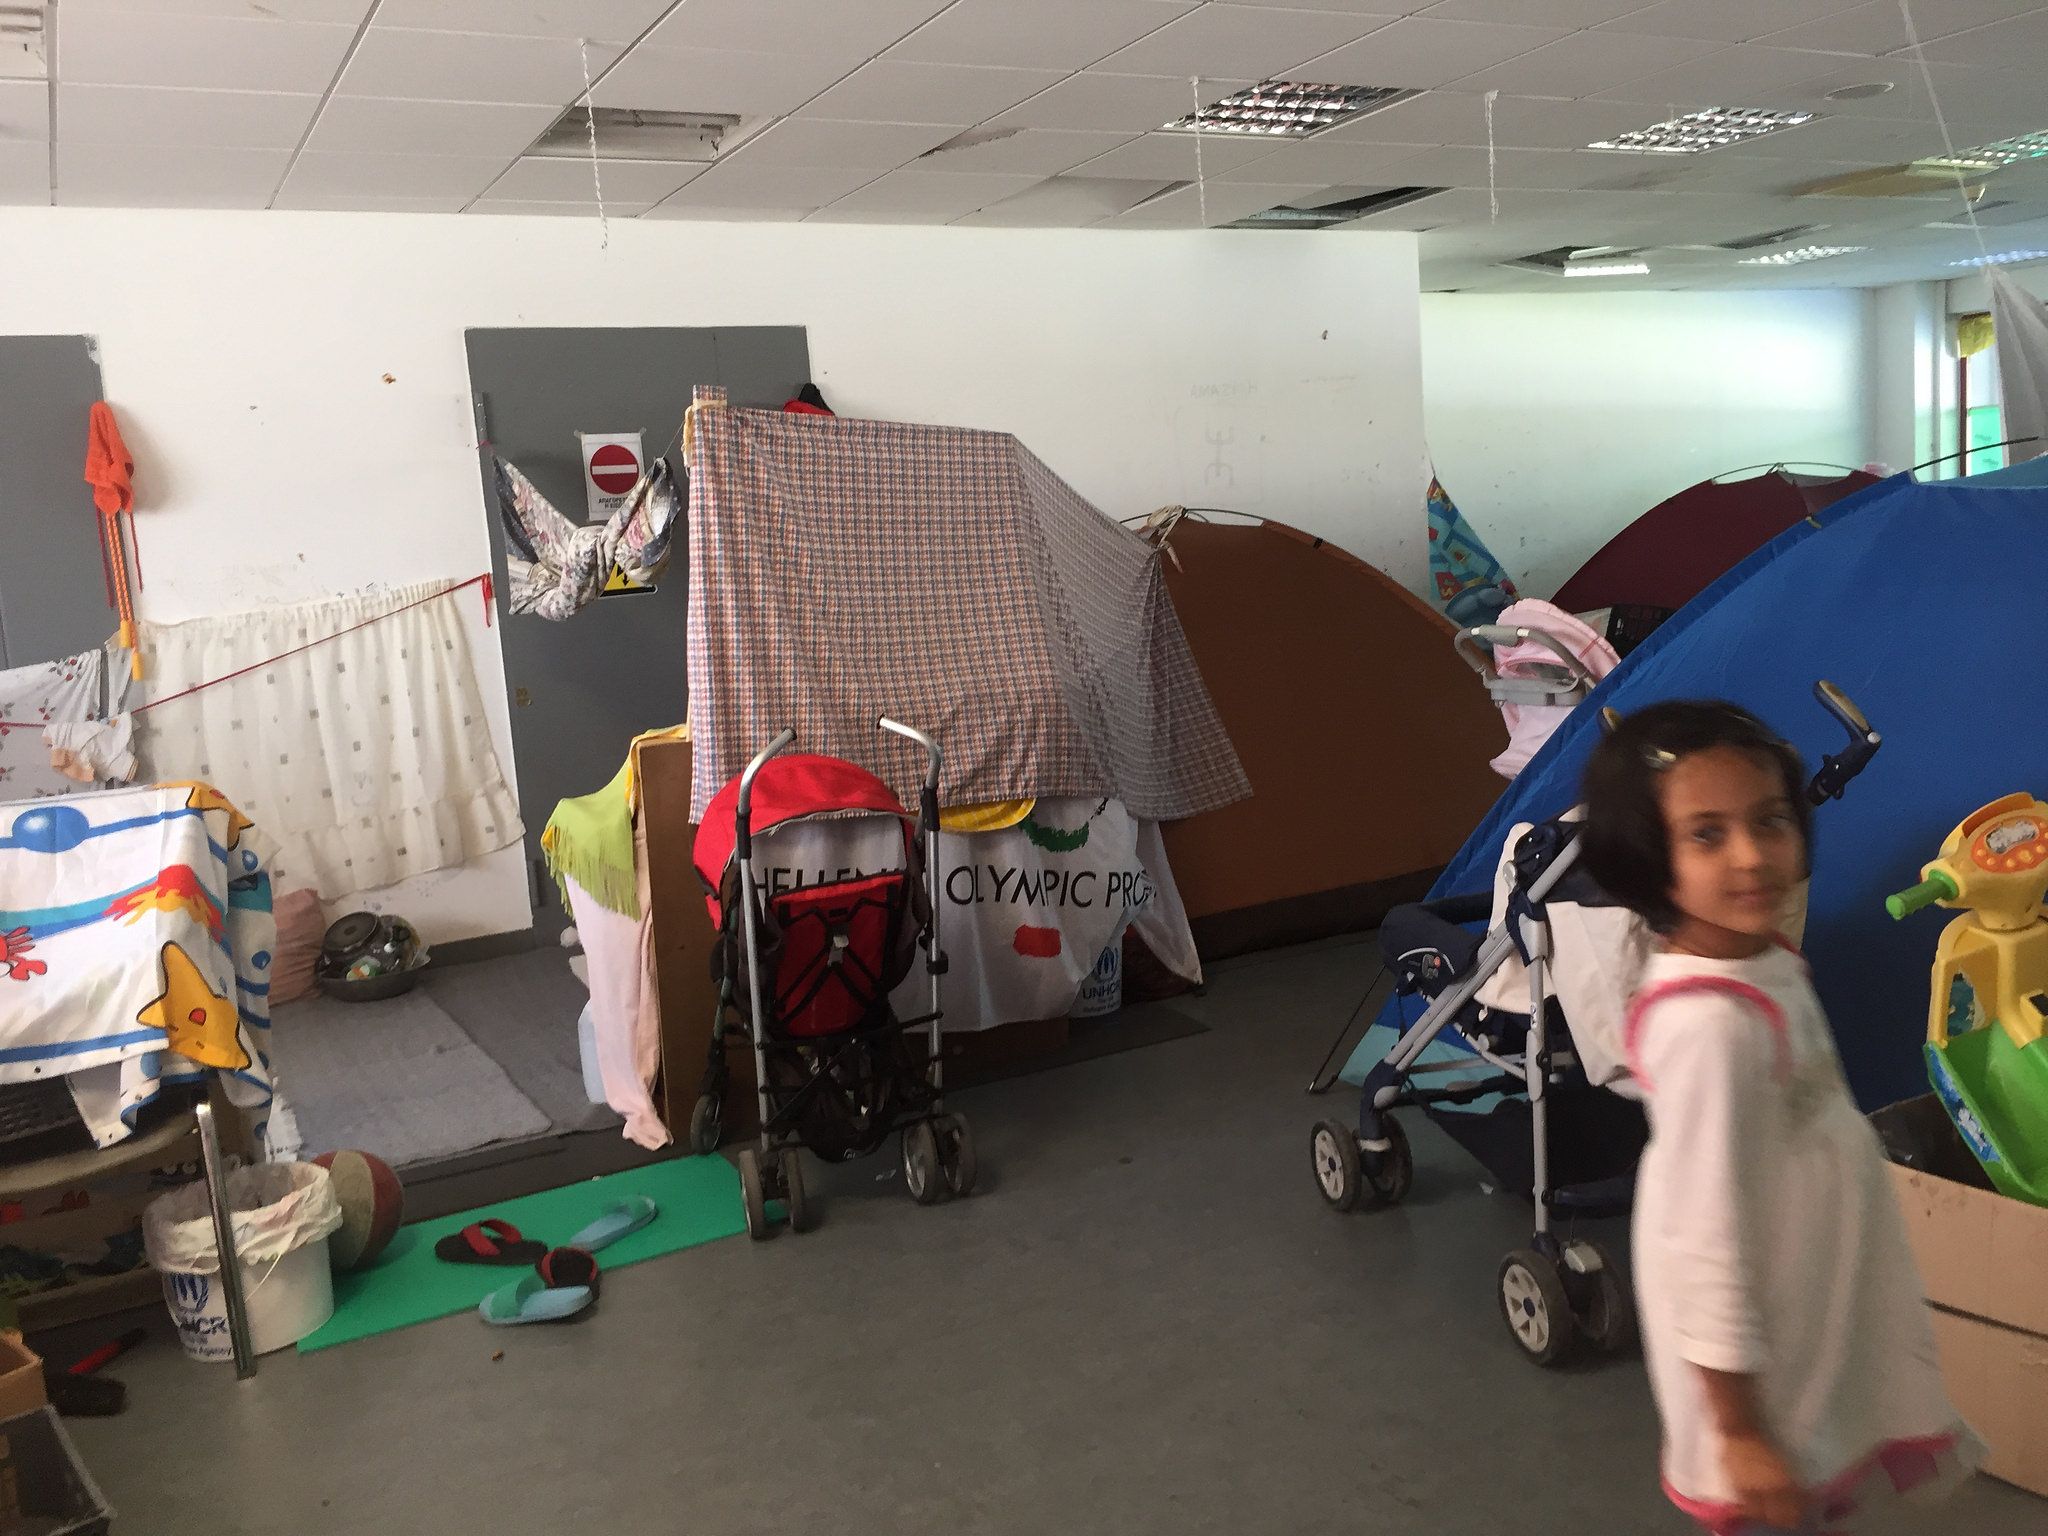 About fifty people including families with children lived in this room, in a mix of tents and make-shift enclosures made with sheets and blankets. Image by Sonia Shah. Greece, 2016.